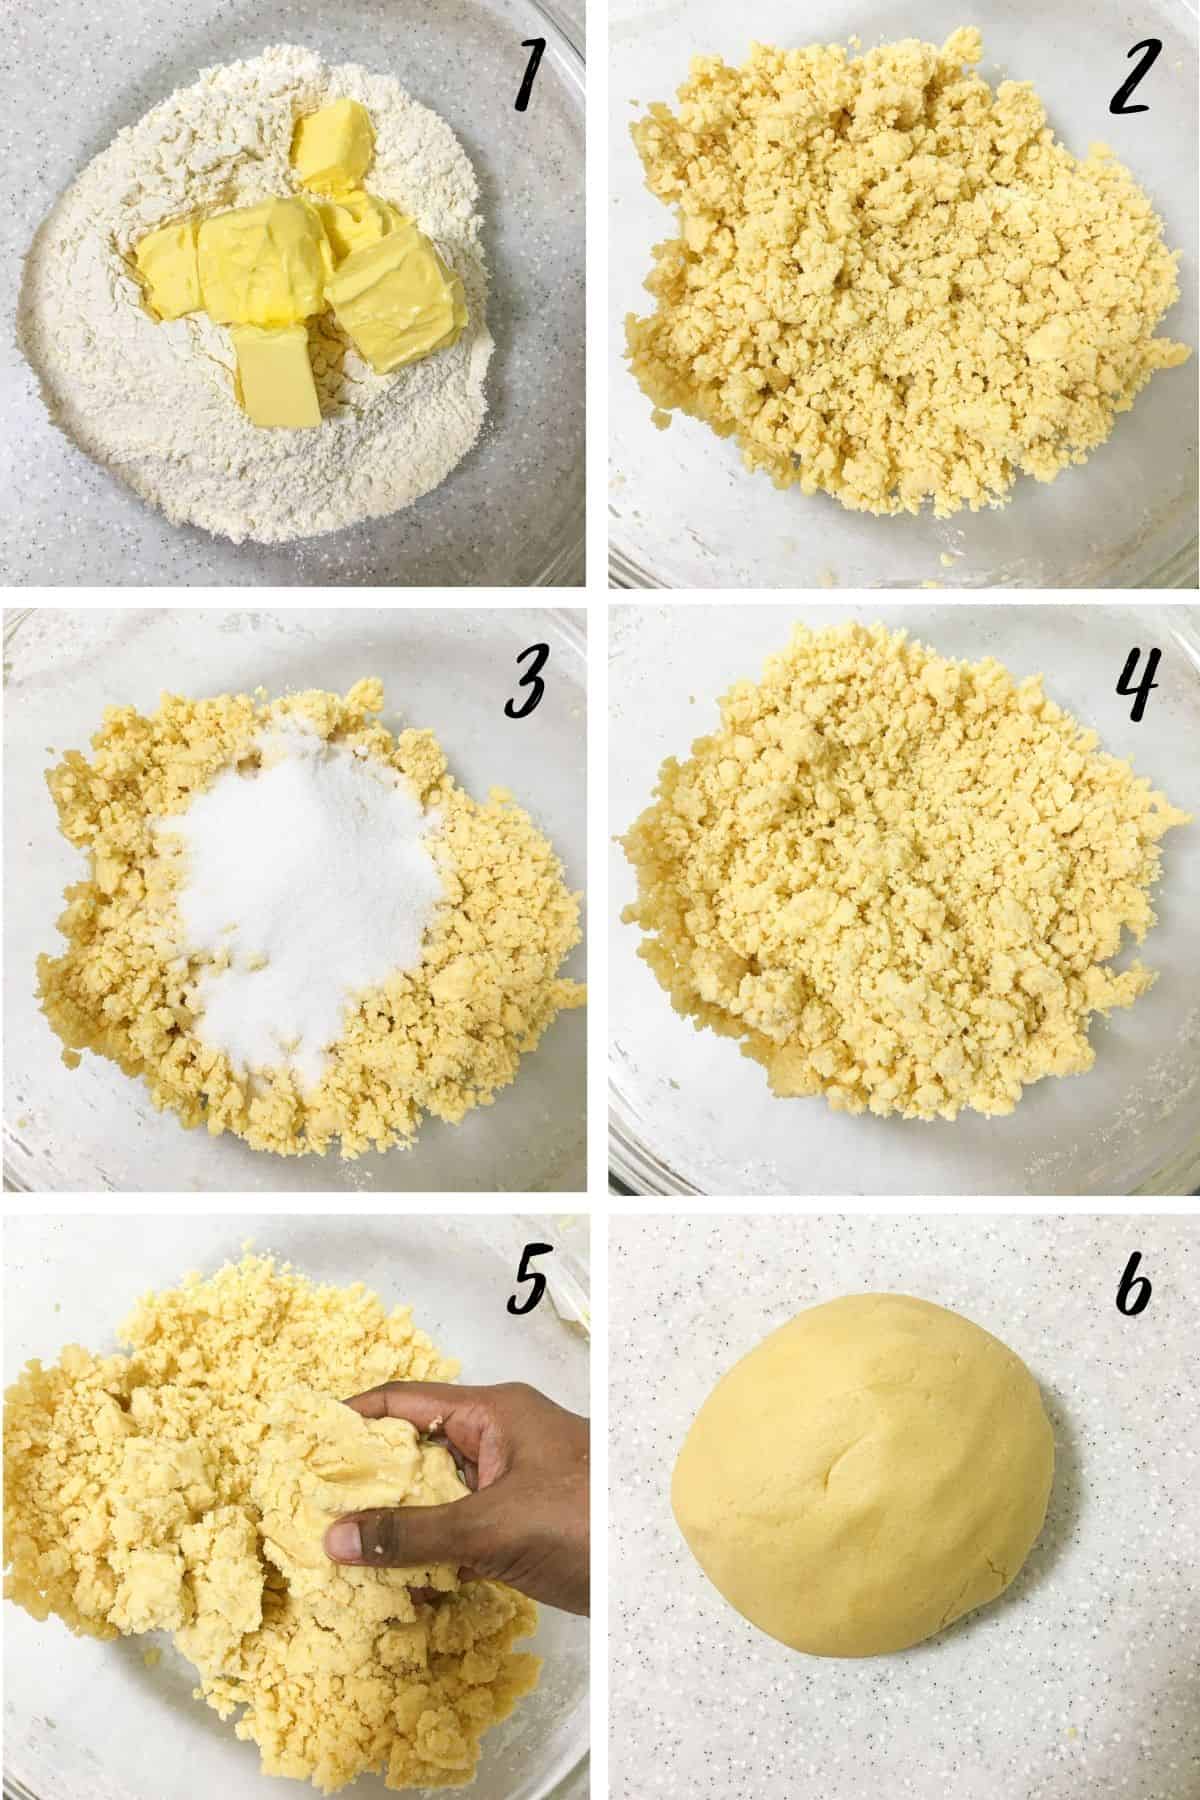 A poster of 6 images showing how to mix shortbread cookie dough